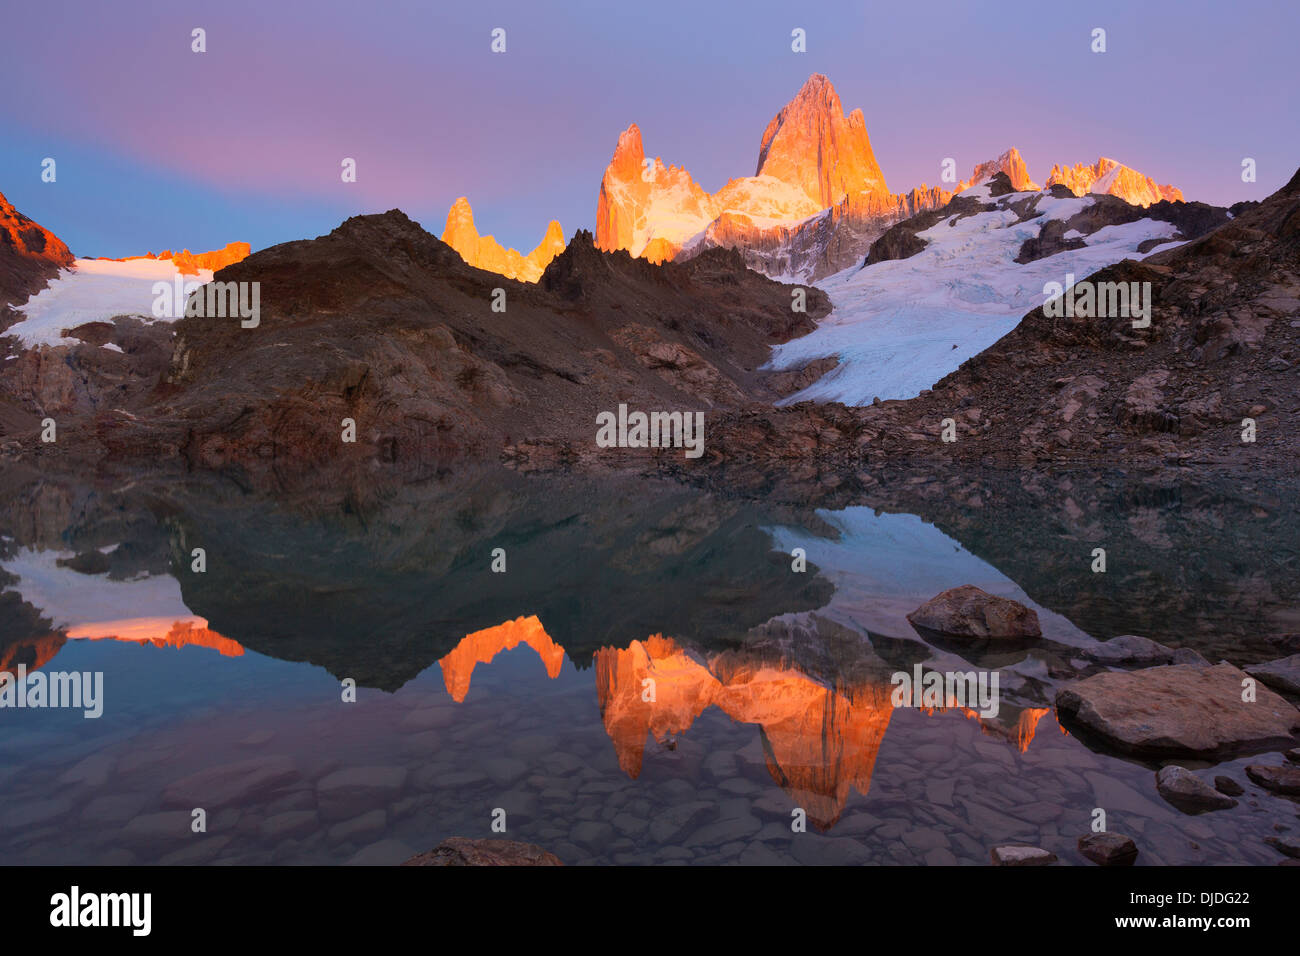 Sunrise on Fitz Roy Massif and its reflection in Lago de los Tres in the foreground.Pategonia.Argentina Stock Photo